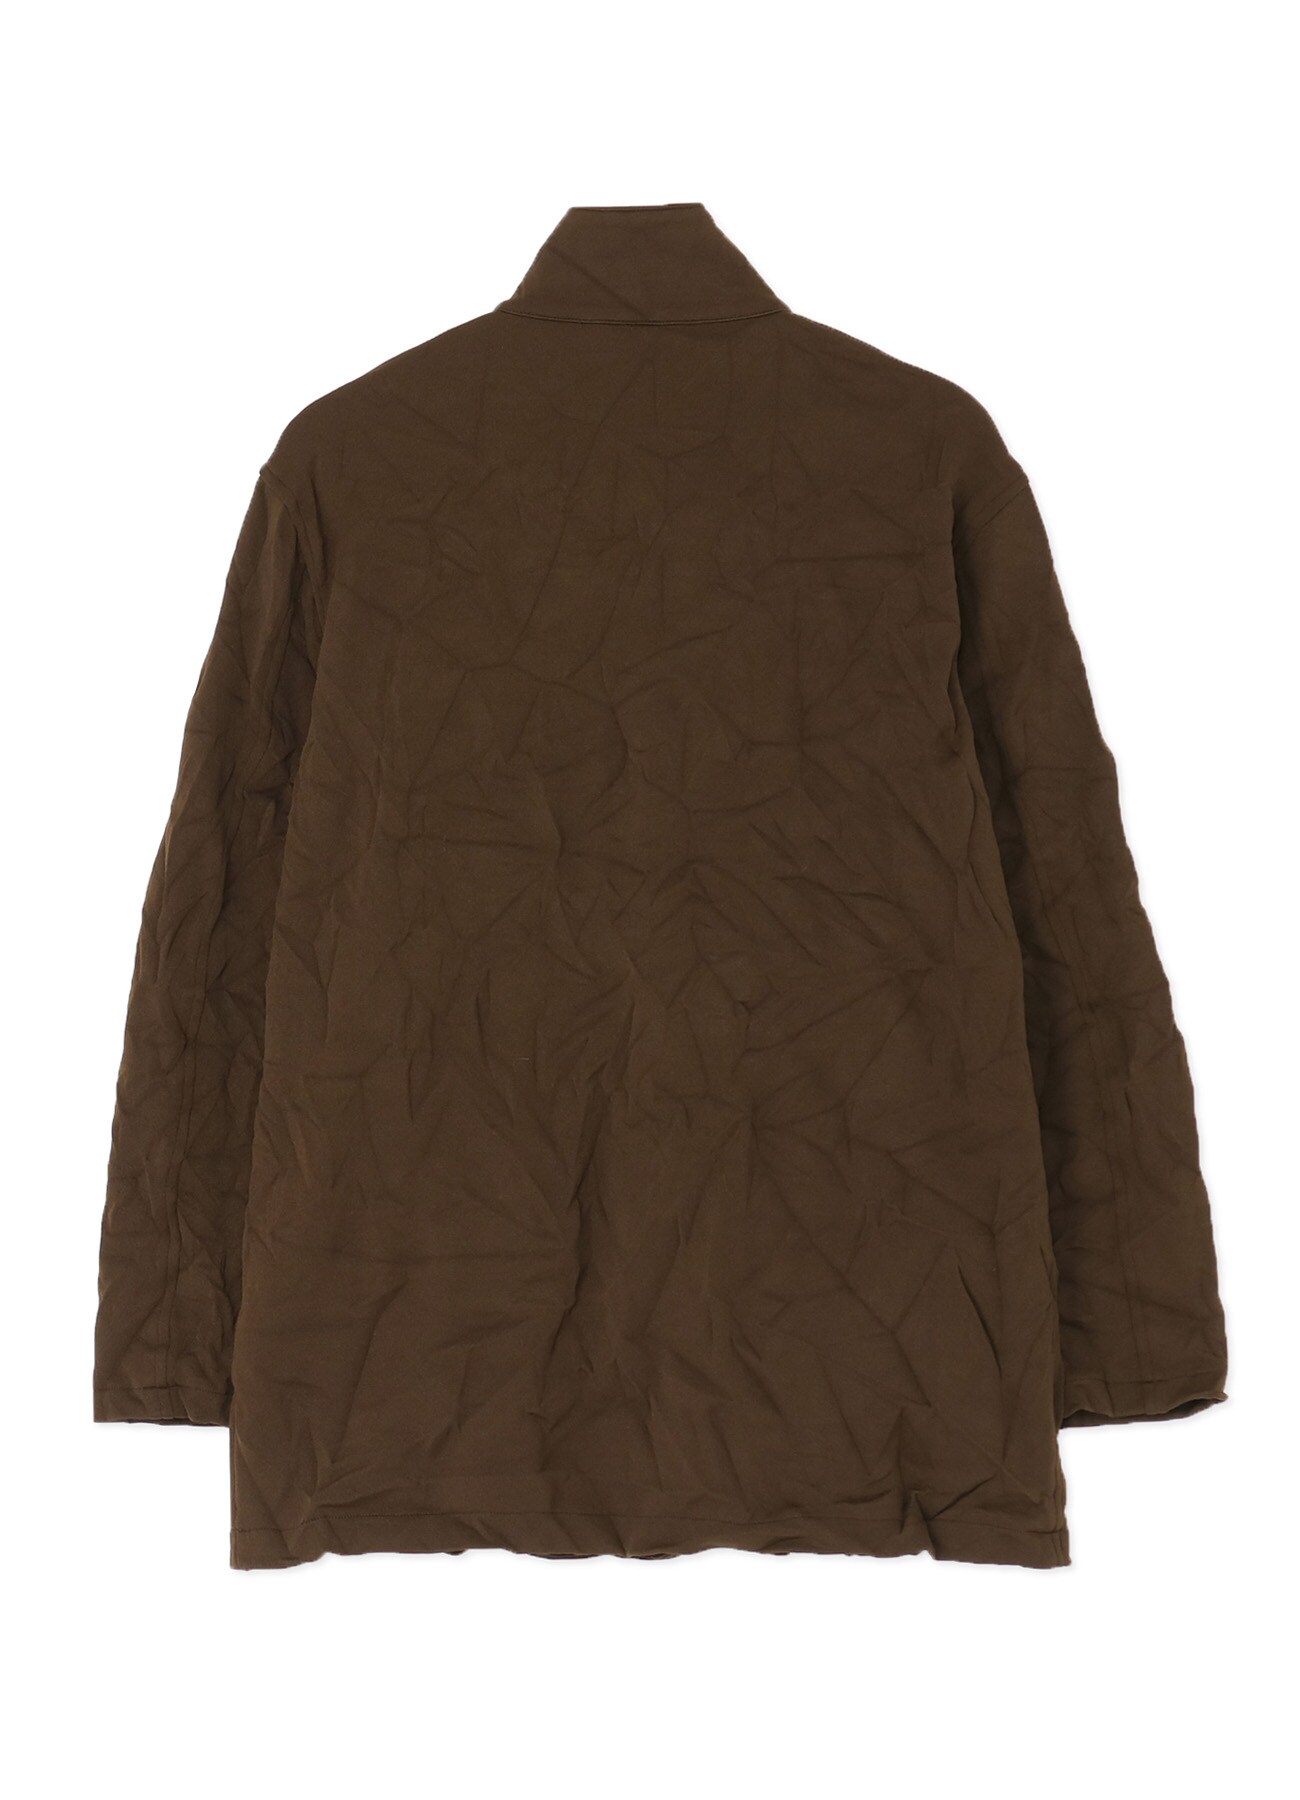 POLYESTER REVERSIBLE WRINKLED STAND COLLAR JACKET